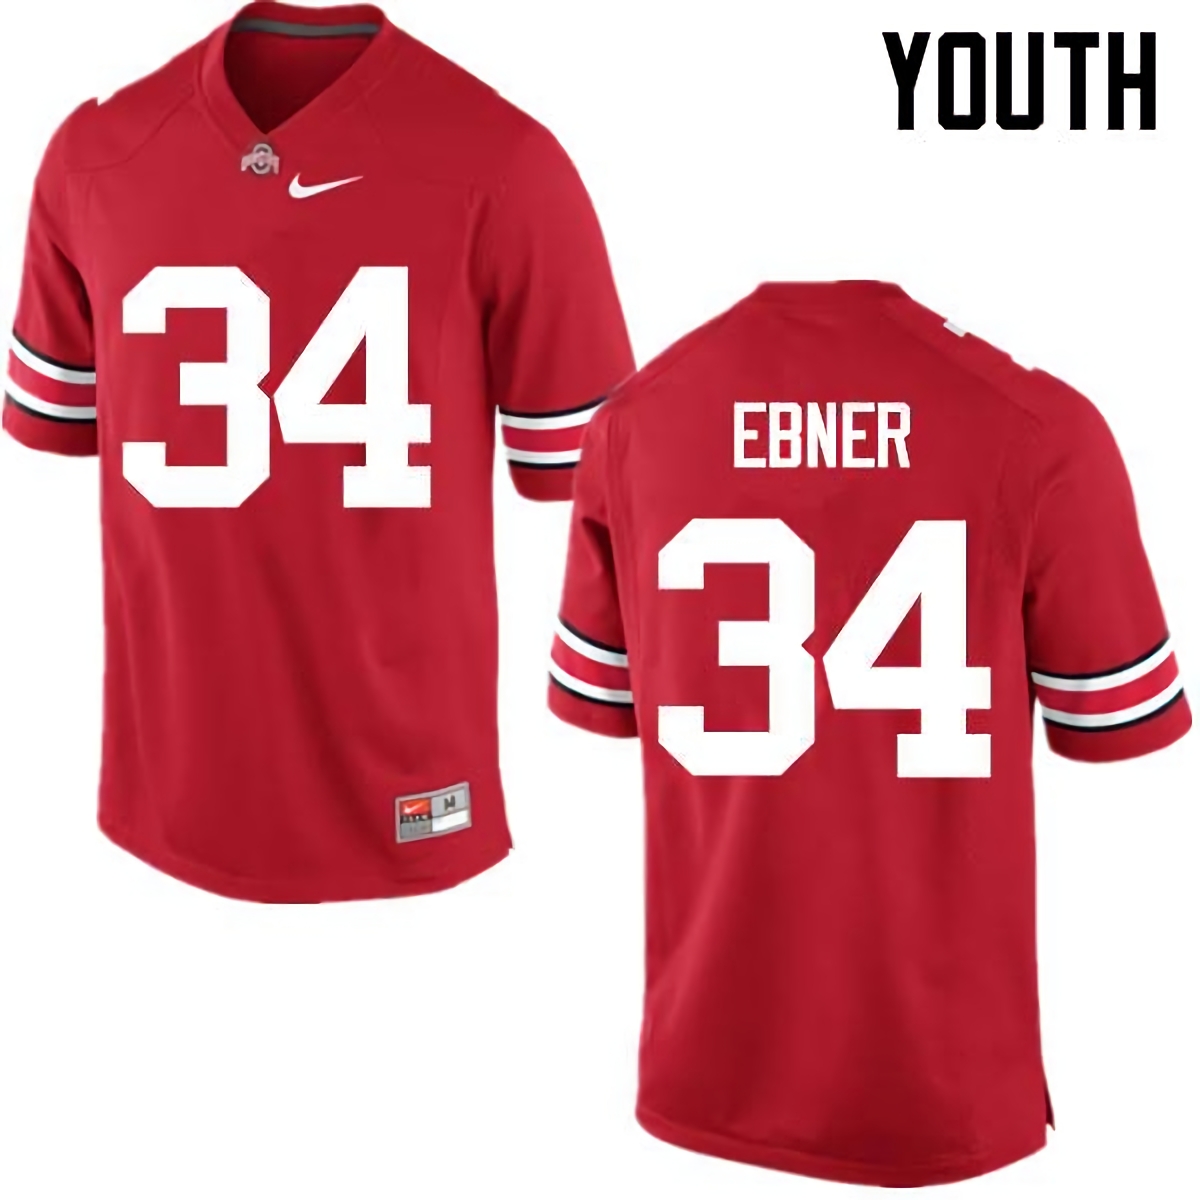 Nate Ebner Ohio State Buckeyes Youth NCAA #34 Nike Red College Stitched Football Jersey CRN7656GD